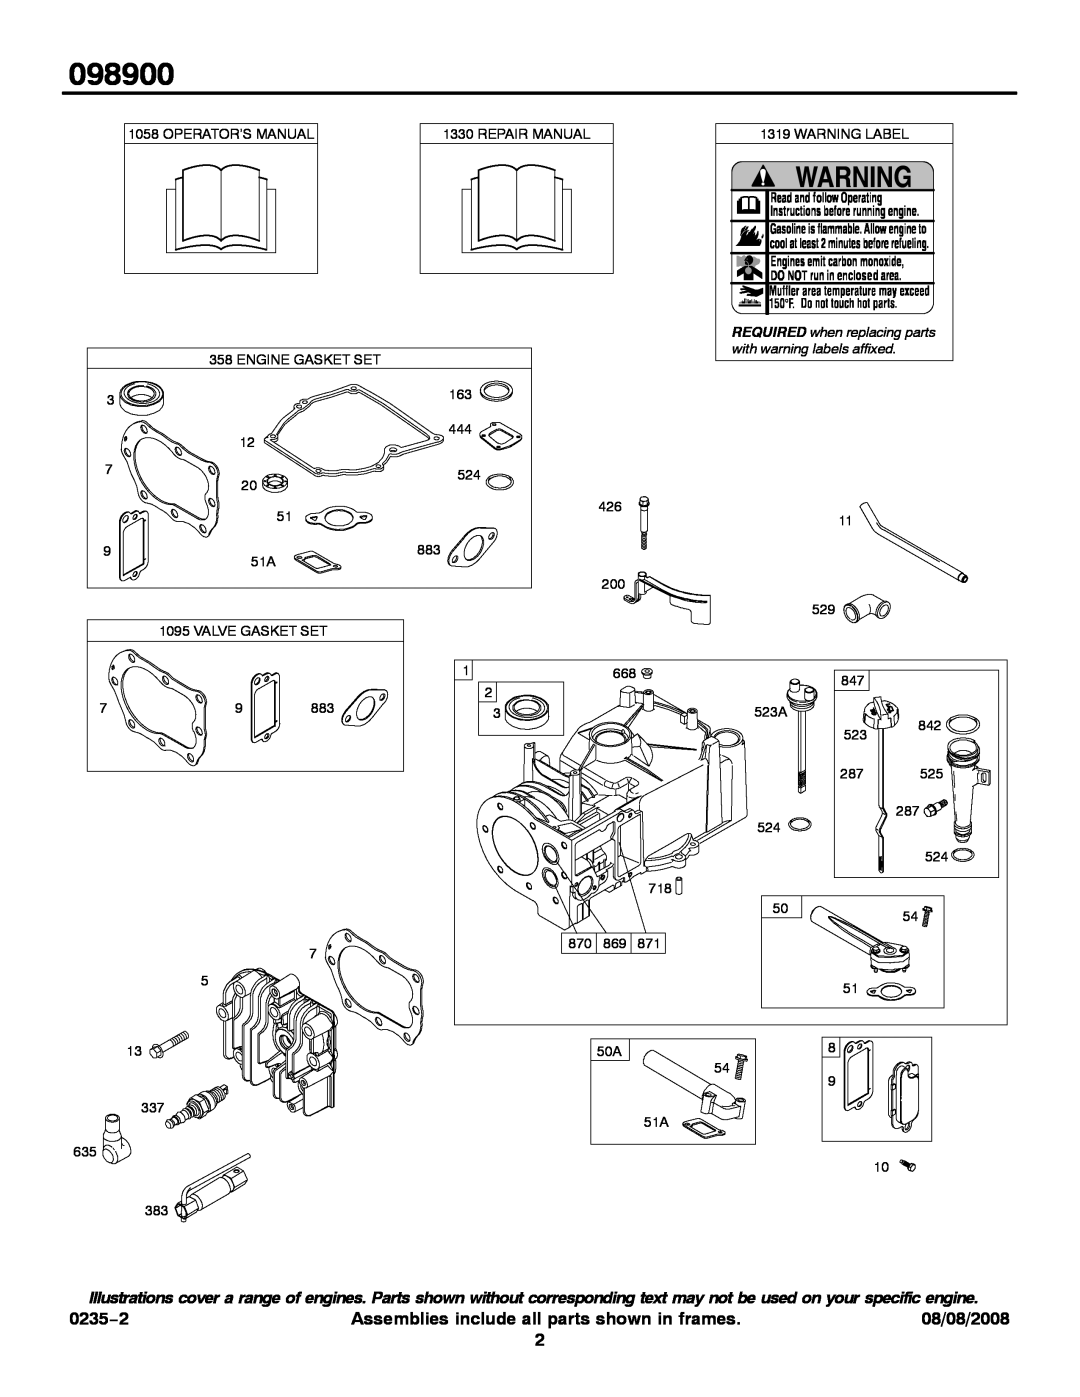 Snapper 098900 0235−2, Assemblies include all parts shown in frames, 08/08/2008, REQUIRED when replacing parts 